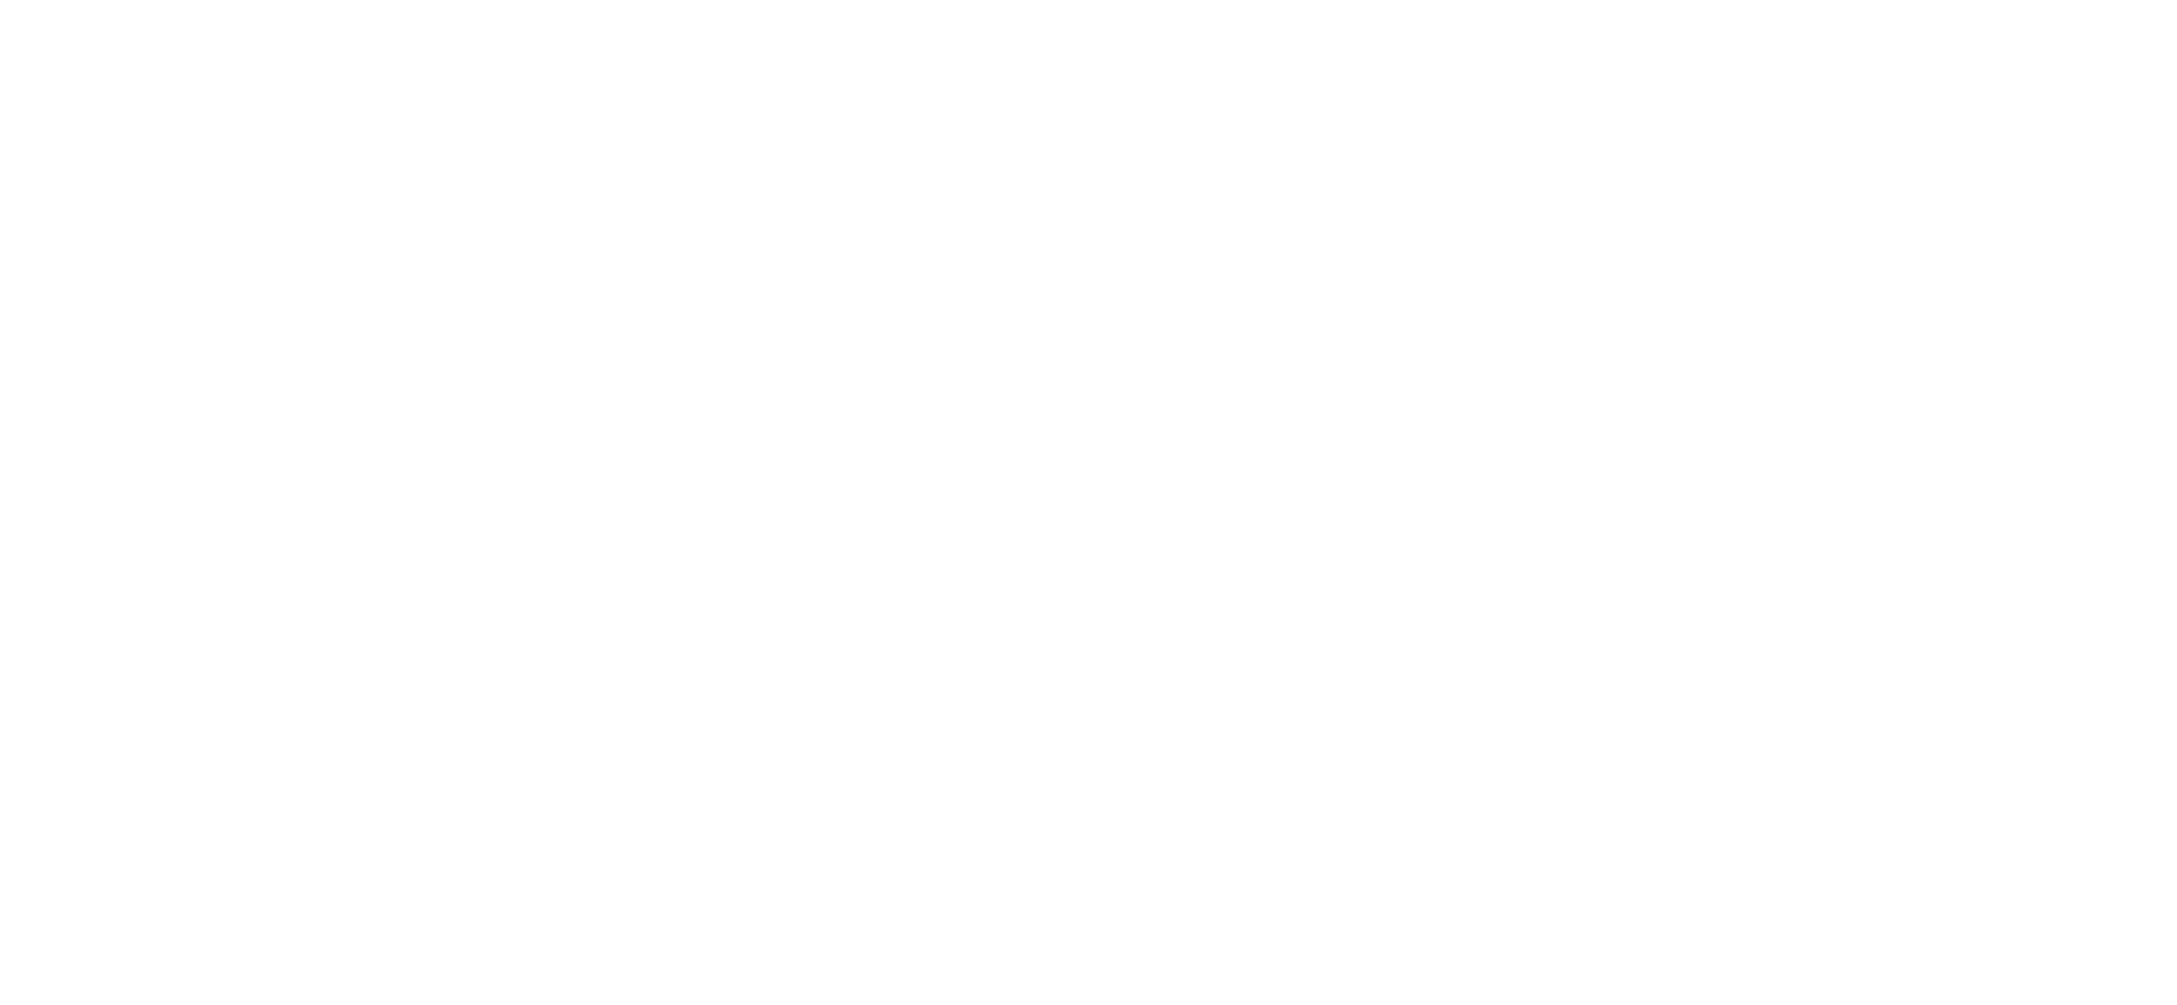 DADS Network